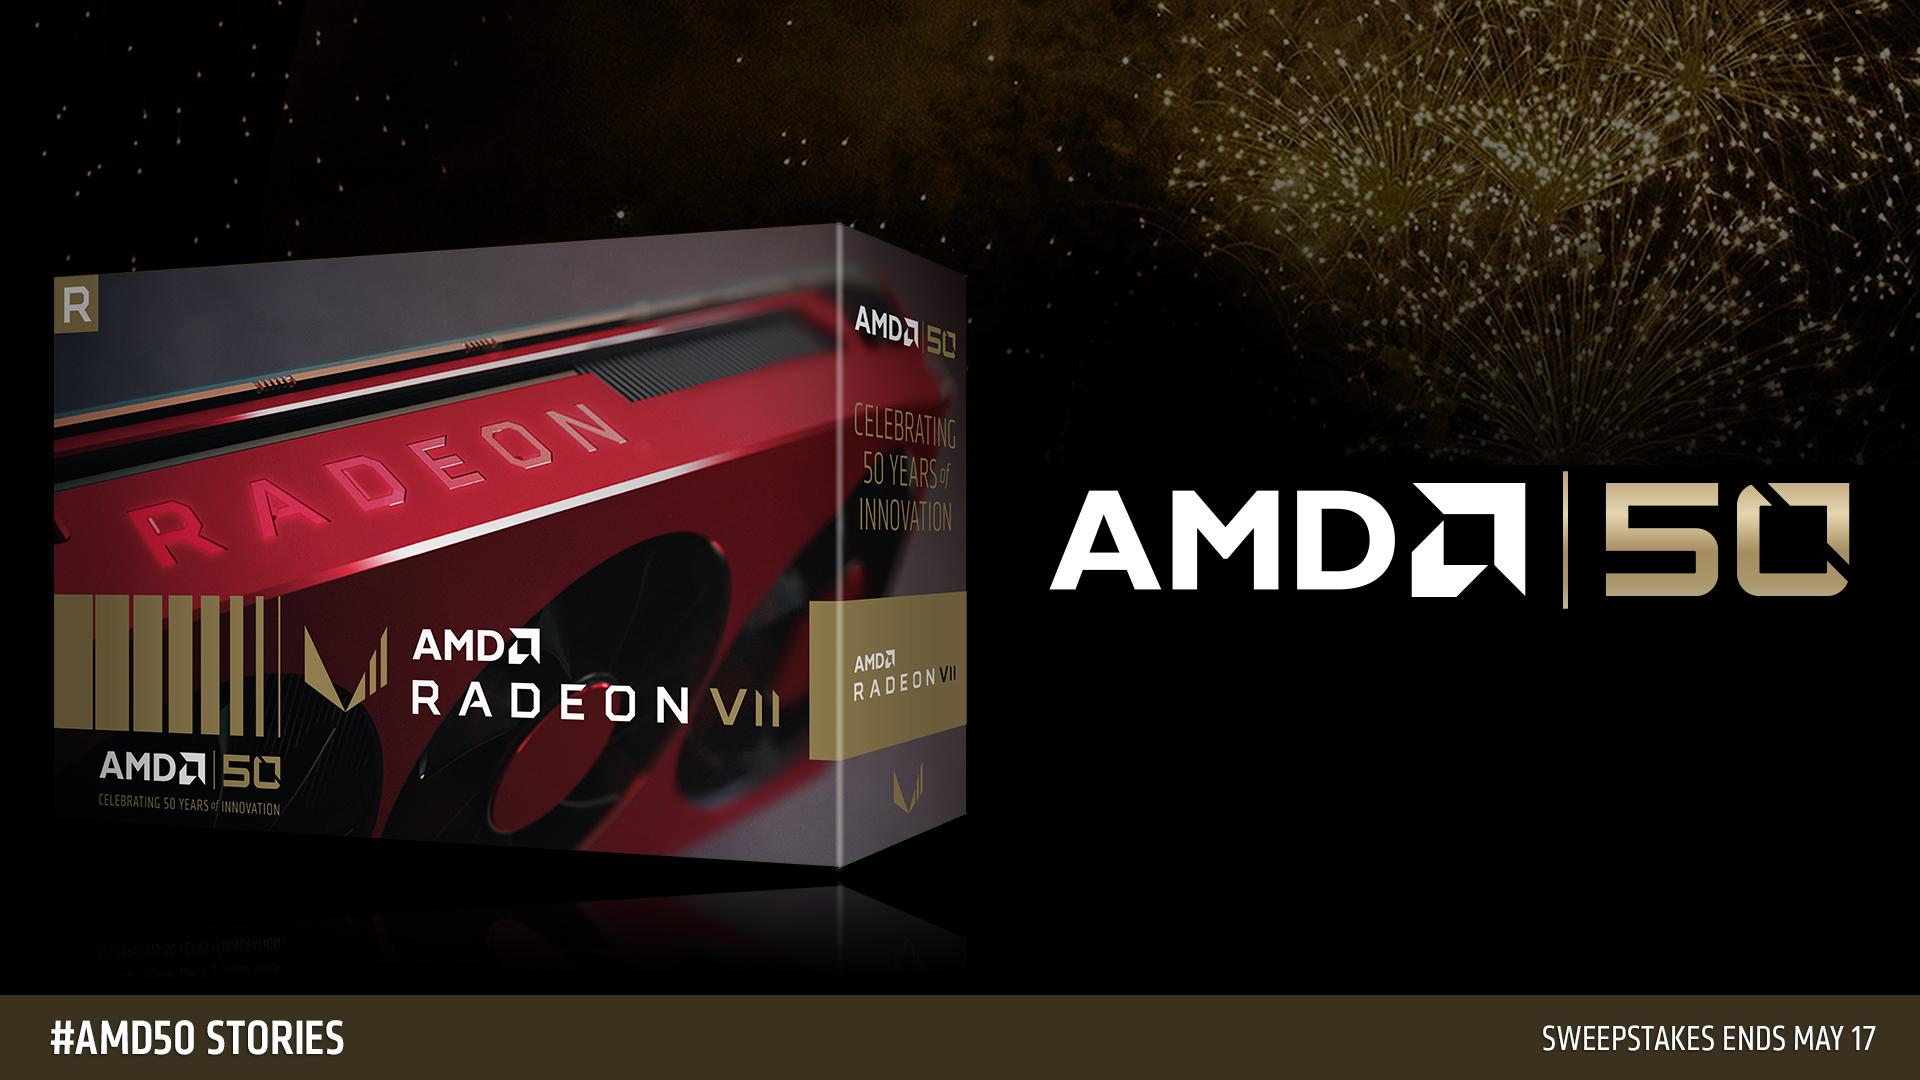 Media asset in full size related to 3dfxzone.it news item entitled as follows: AMD lancia ufficialmente Ryzen 7 2700X Gold Edition e Radeon VII  Gold Edition | Image Name: news29532_AMD-50th-anniversary-launch-gold-edition_2.jpg